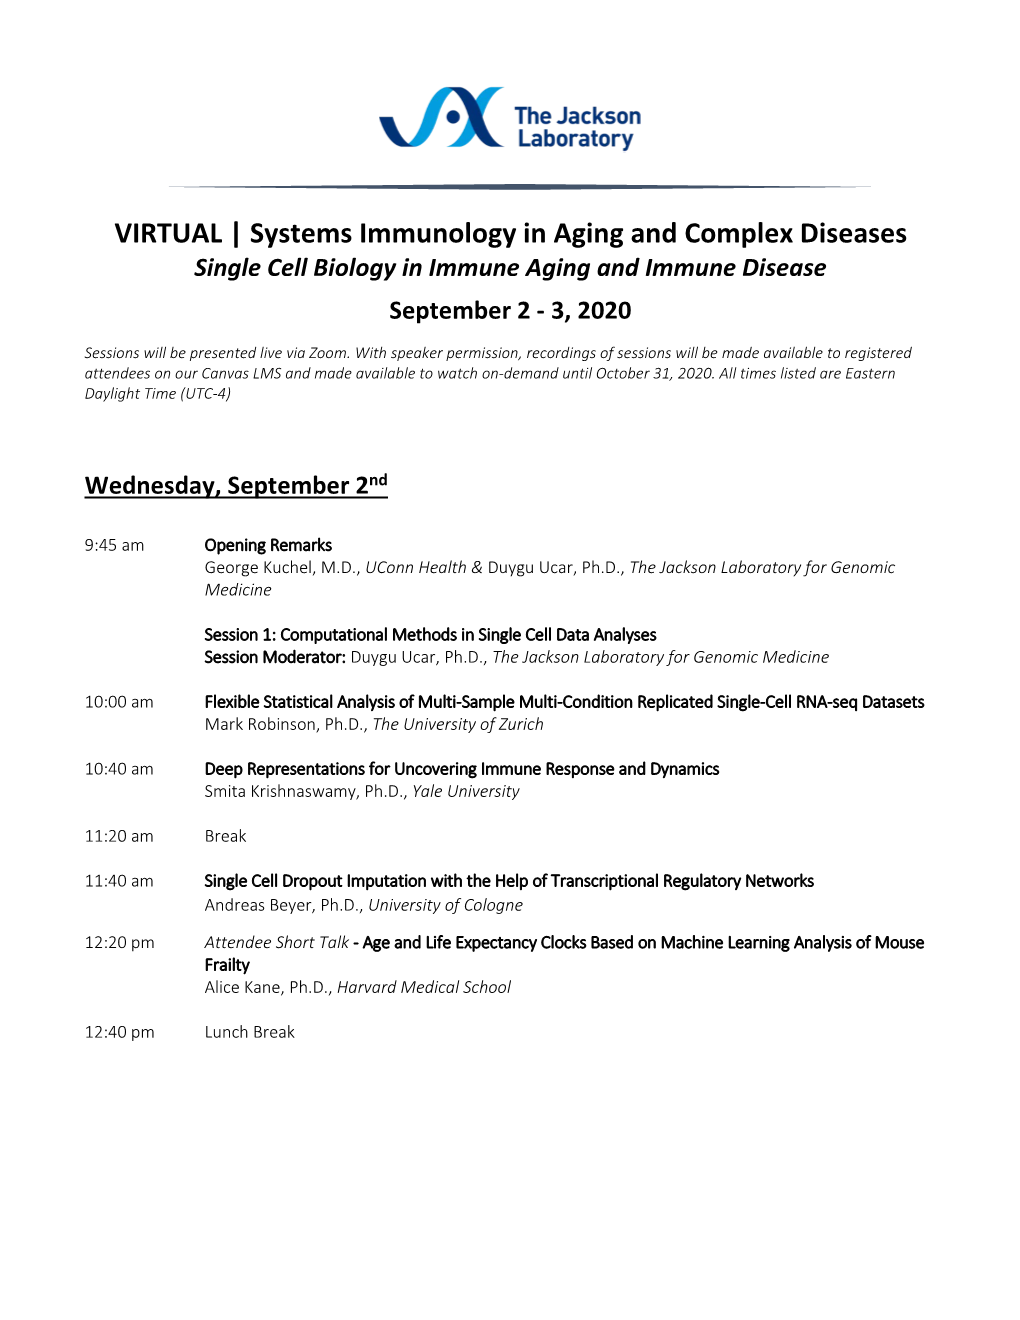 VIRTUAL | Systems Immunology in Aging and Complex Diseases Single Cell Biology in Immune Aging and Immune Disease